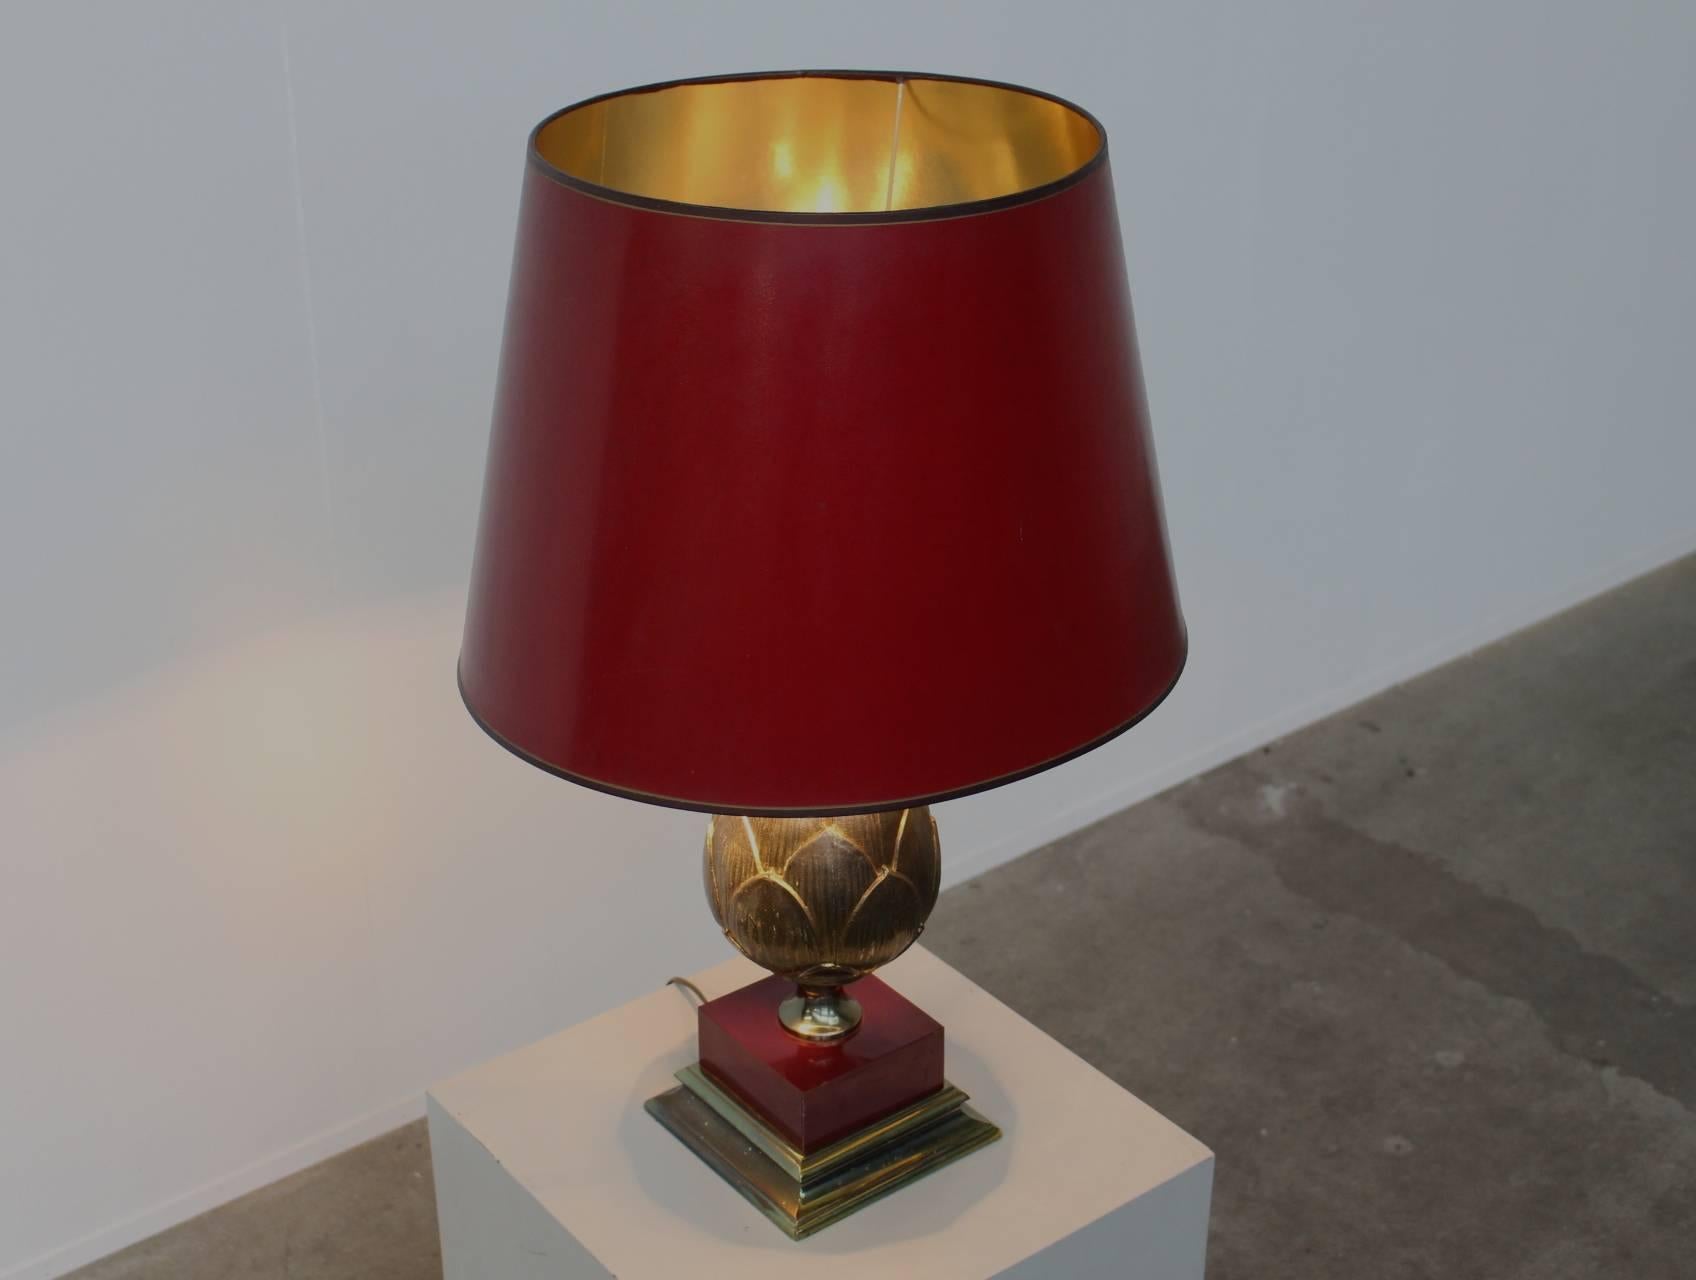 Completely original with it's original red shade with golden inside which is very rare stunningly beautiful large table lamp featuring a golden artichoke. A wonderful and very rare example of the french luxuary style that Maison Charles always oozes.